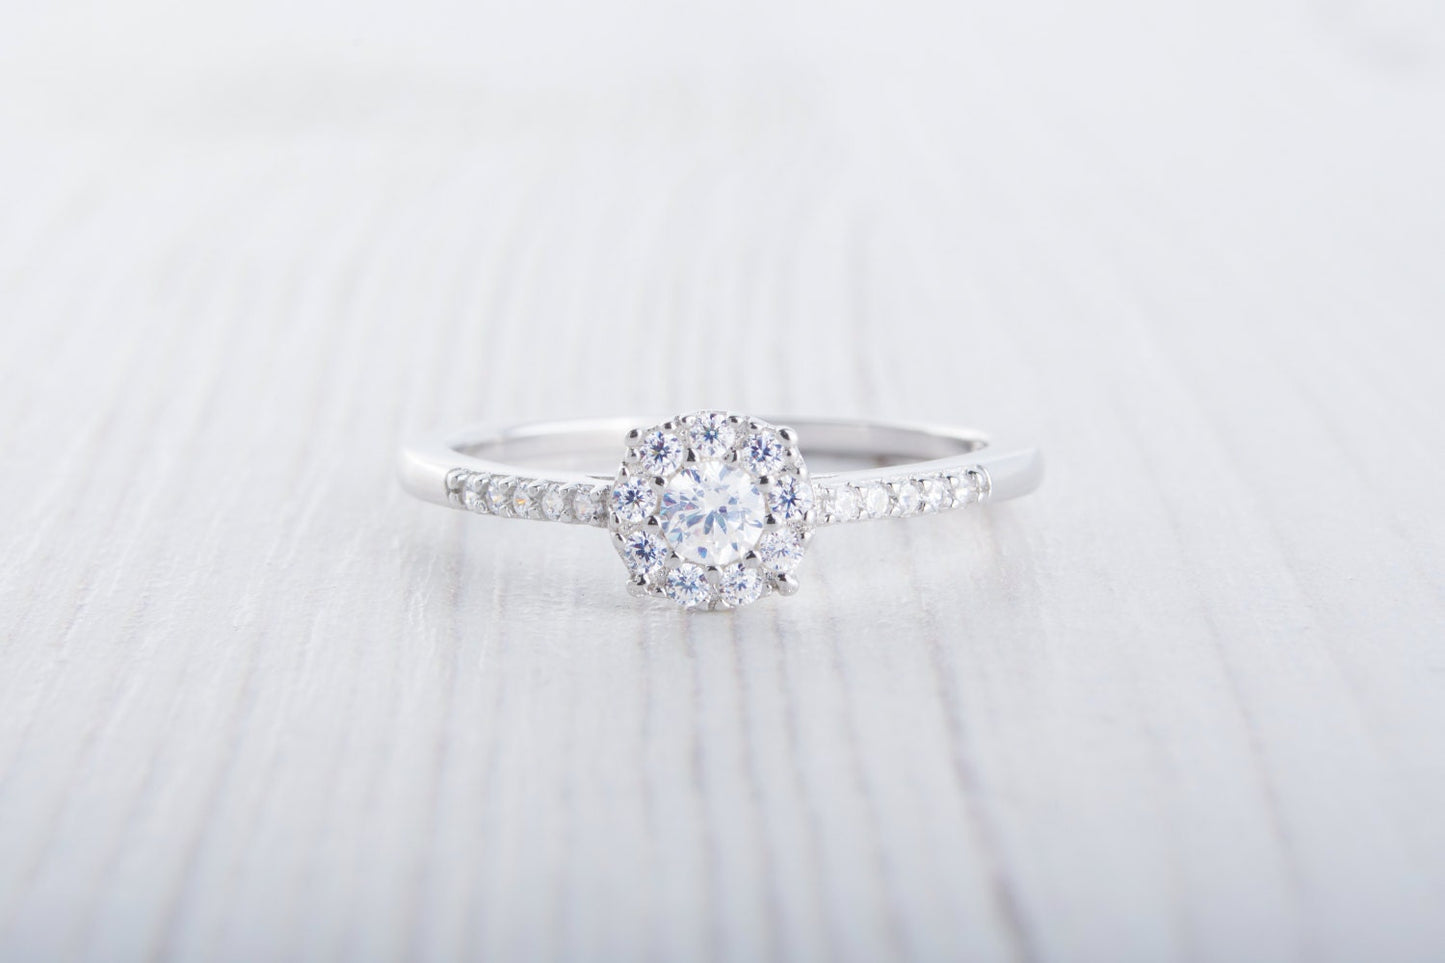 Genuine Moissanite Engagement Ring - Available in Sterling Silver or White Gold Filled - Handmade